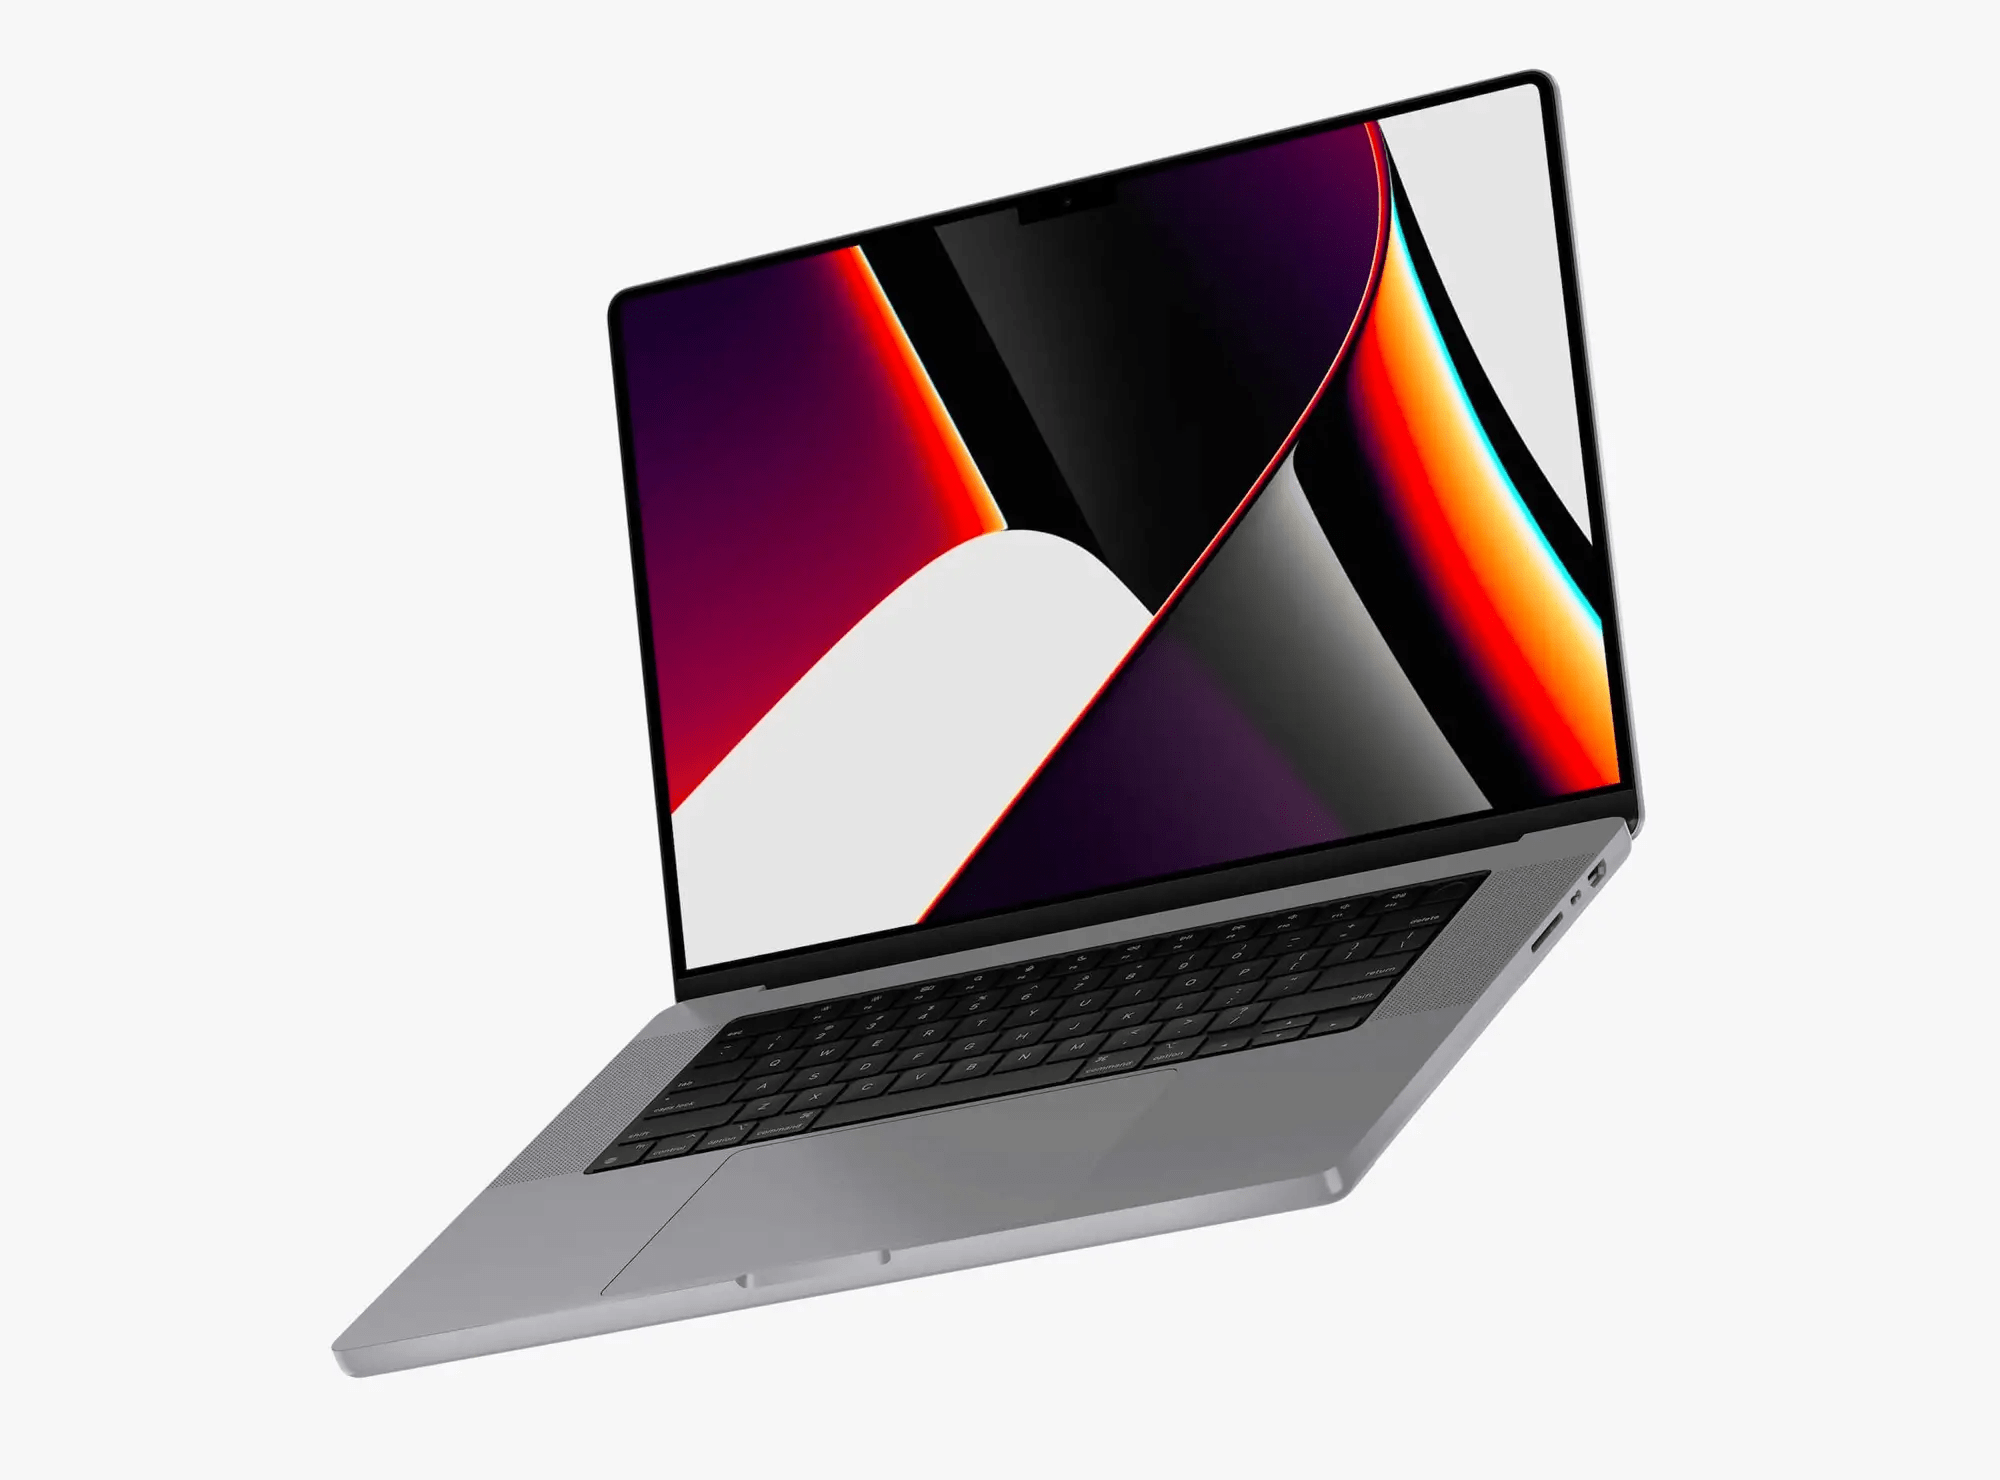 Free MacBook Pro 16 inch Mockup in 3 color styles and mega resolution 6000x4500px for showcasing software, website, or app designs